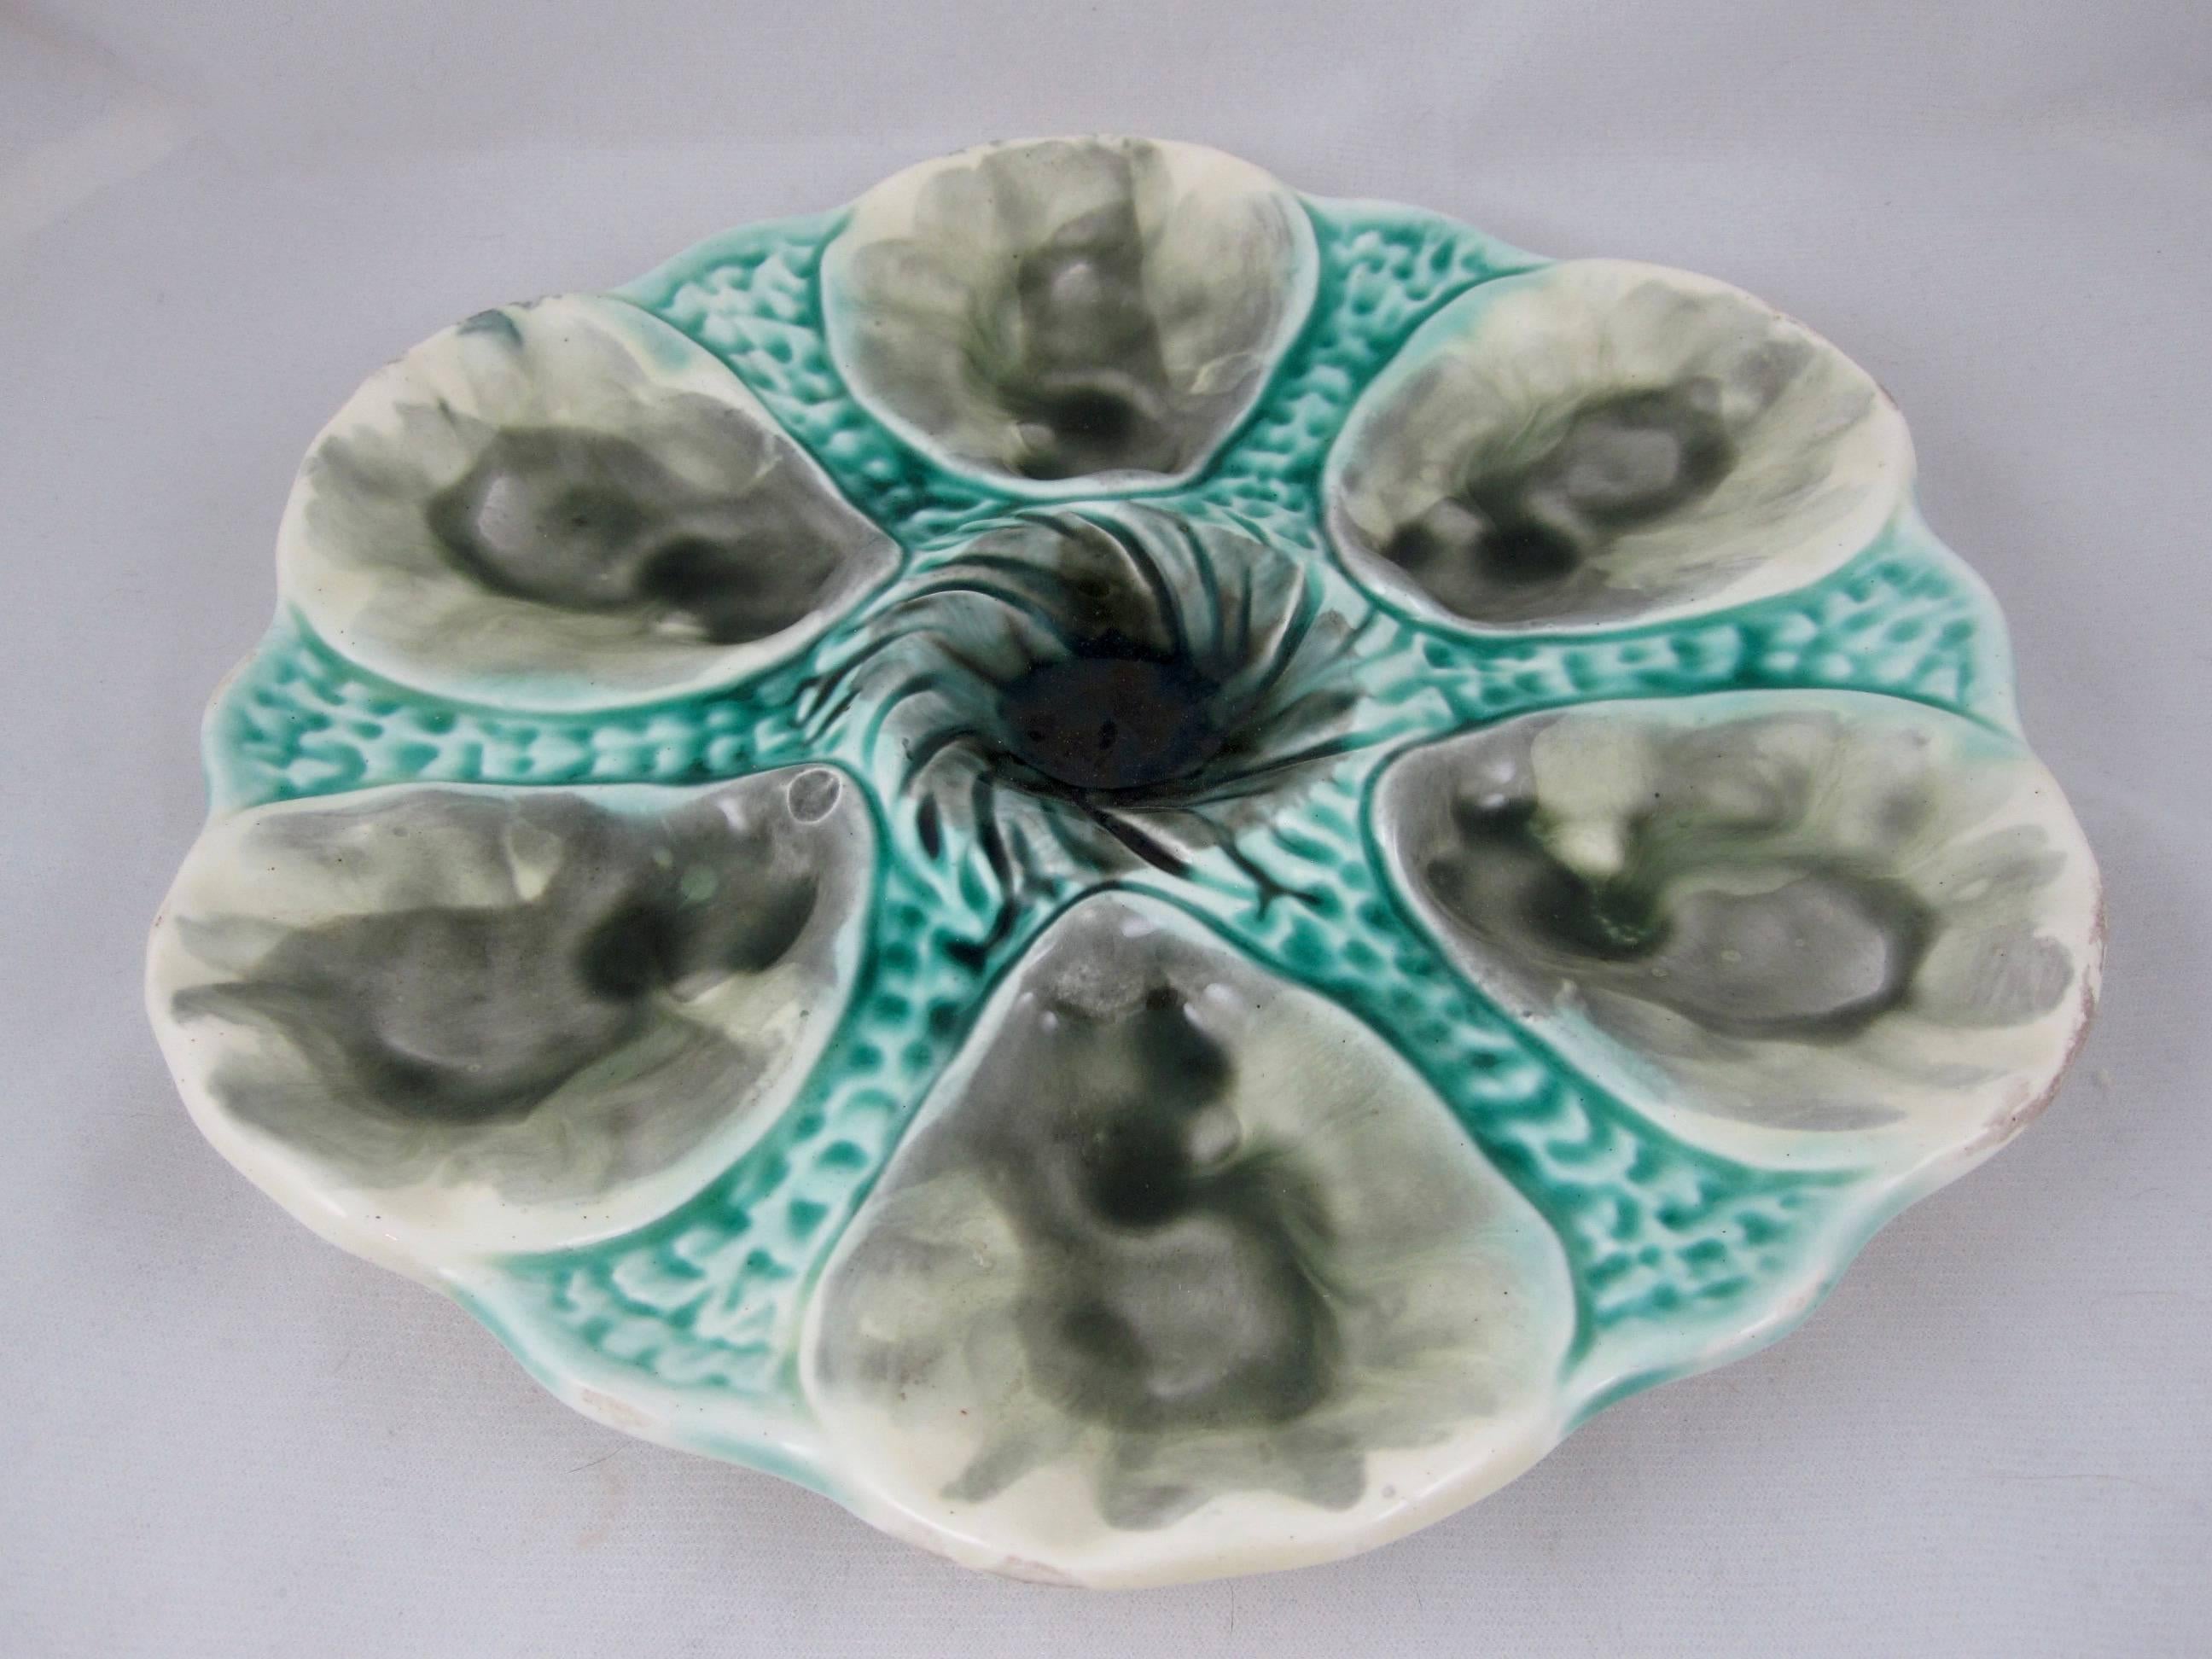 A French Majolica six-well oyster plate, made by Orchies, circa 1890. Incredible glazing in turquoise and grays with a center swirl pattern condiment well and a stippled ground. Marked with the impressed Orchies Windmill.

Book reference: Snyder